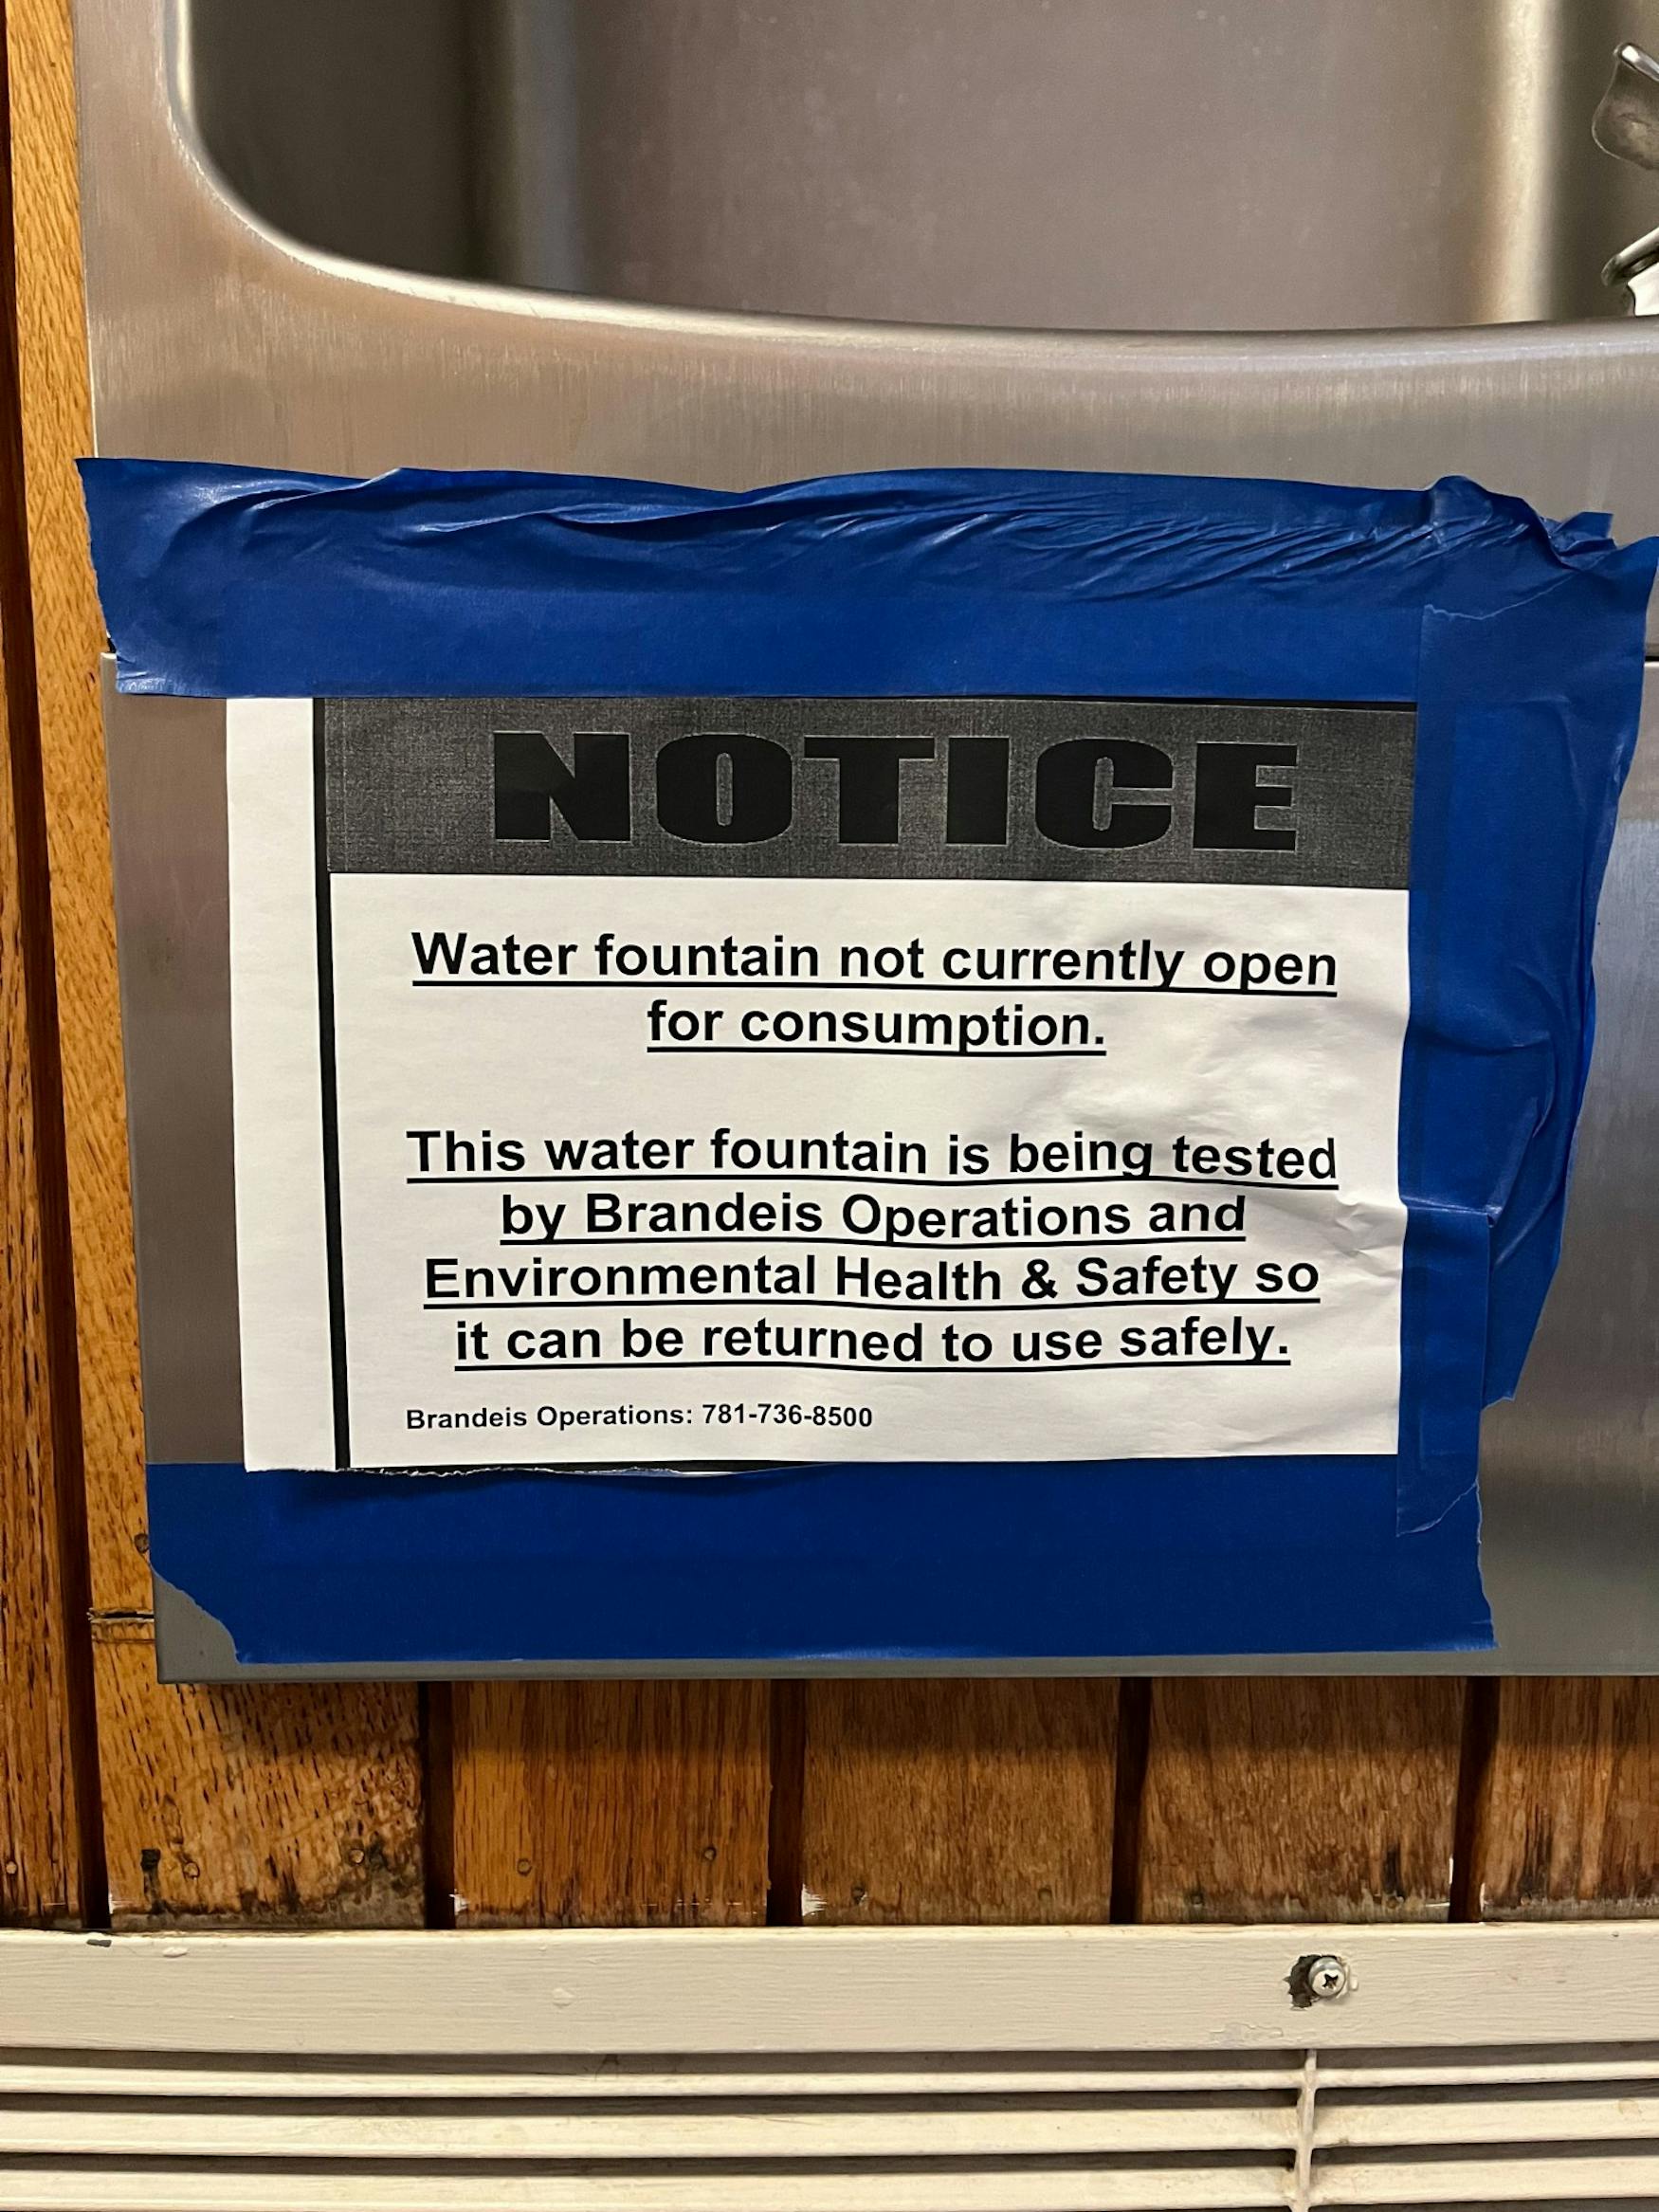 As of Feb. 7, this notice remains posted on the drinking fountain on the second floor of Brown.